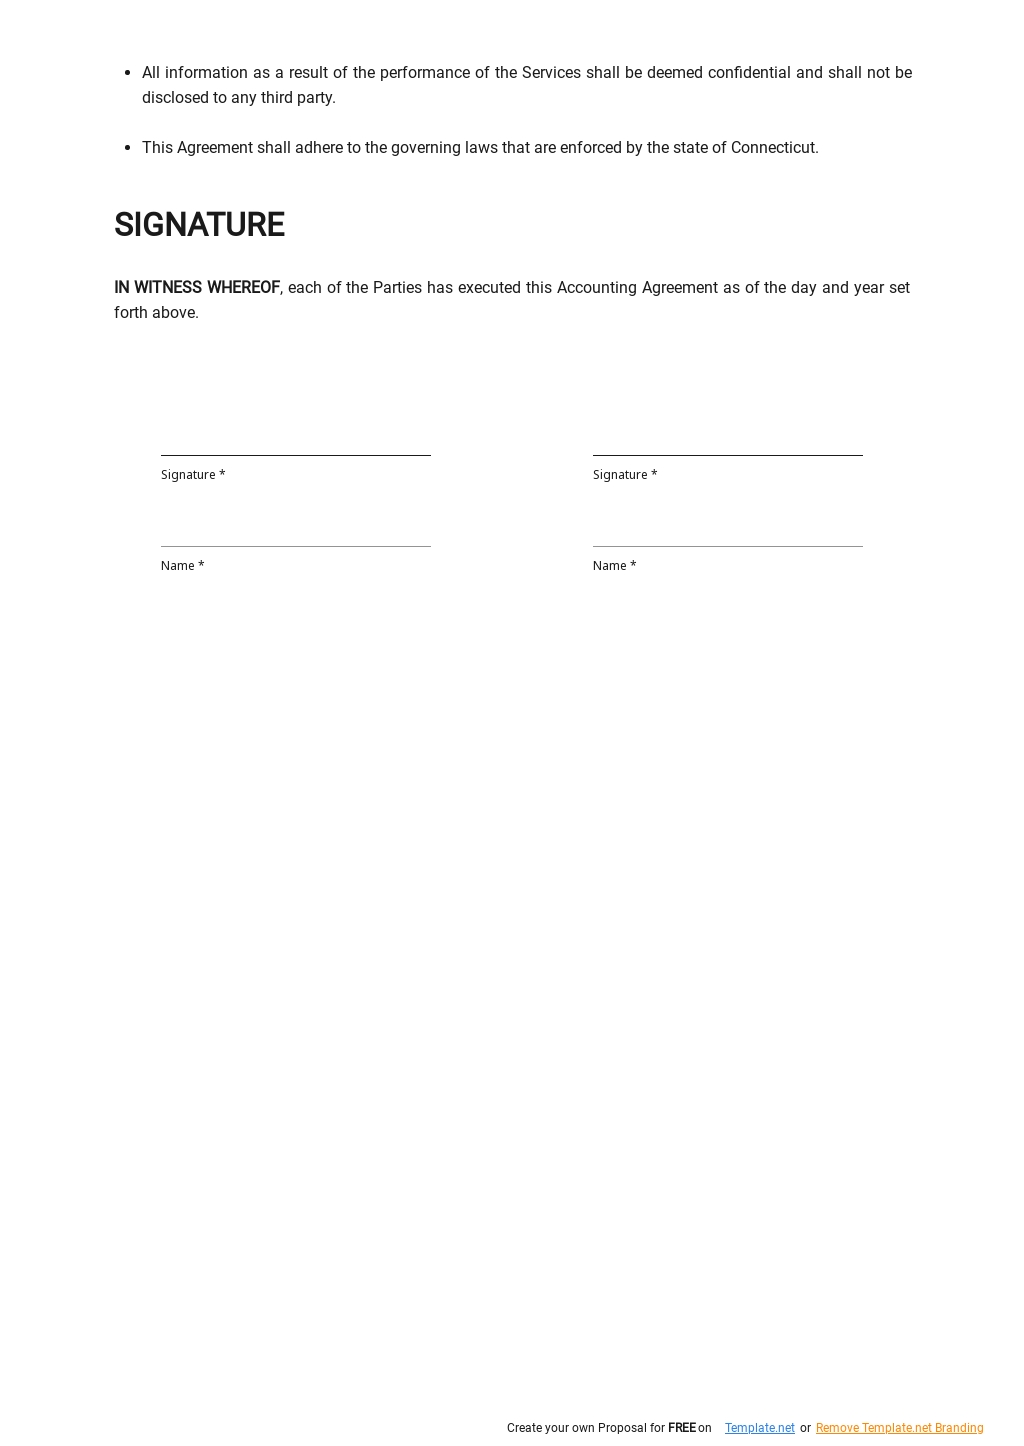 Accounting Agreement Template 2.jpe